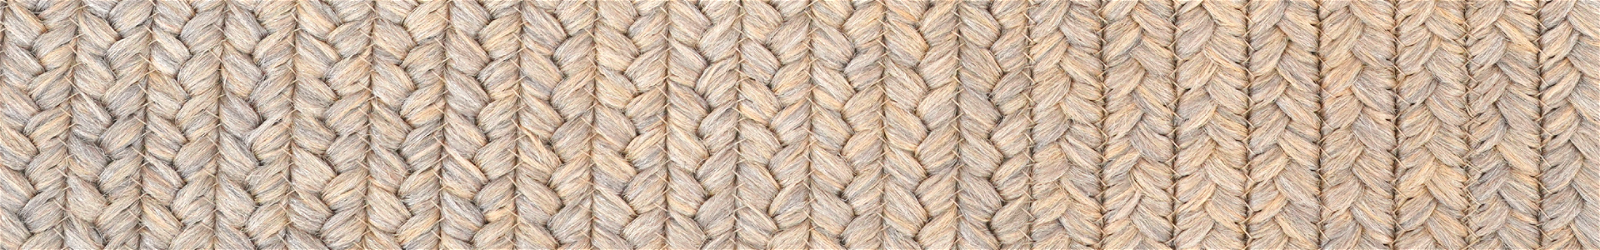 Oval - Brown Braided Rugs